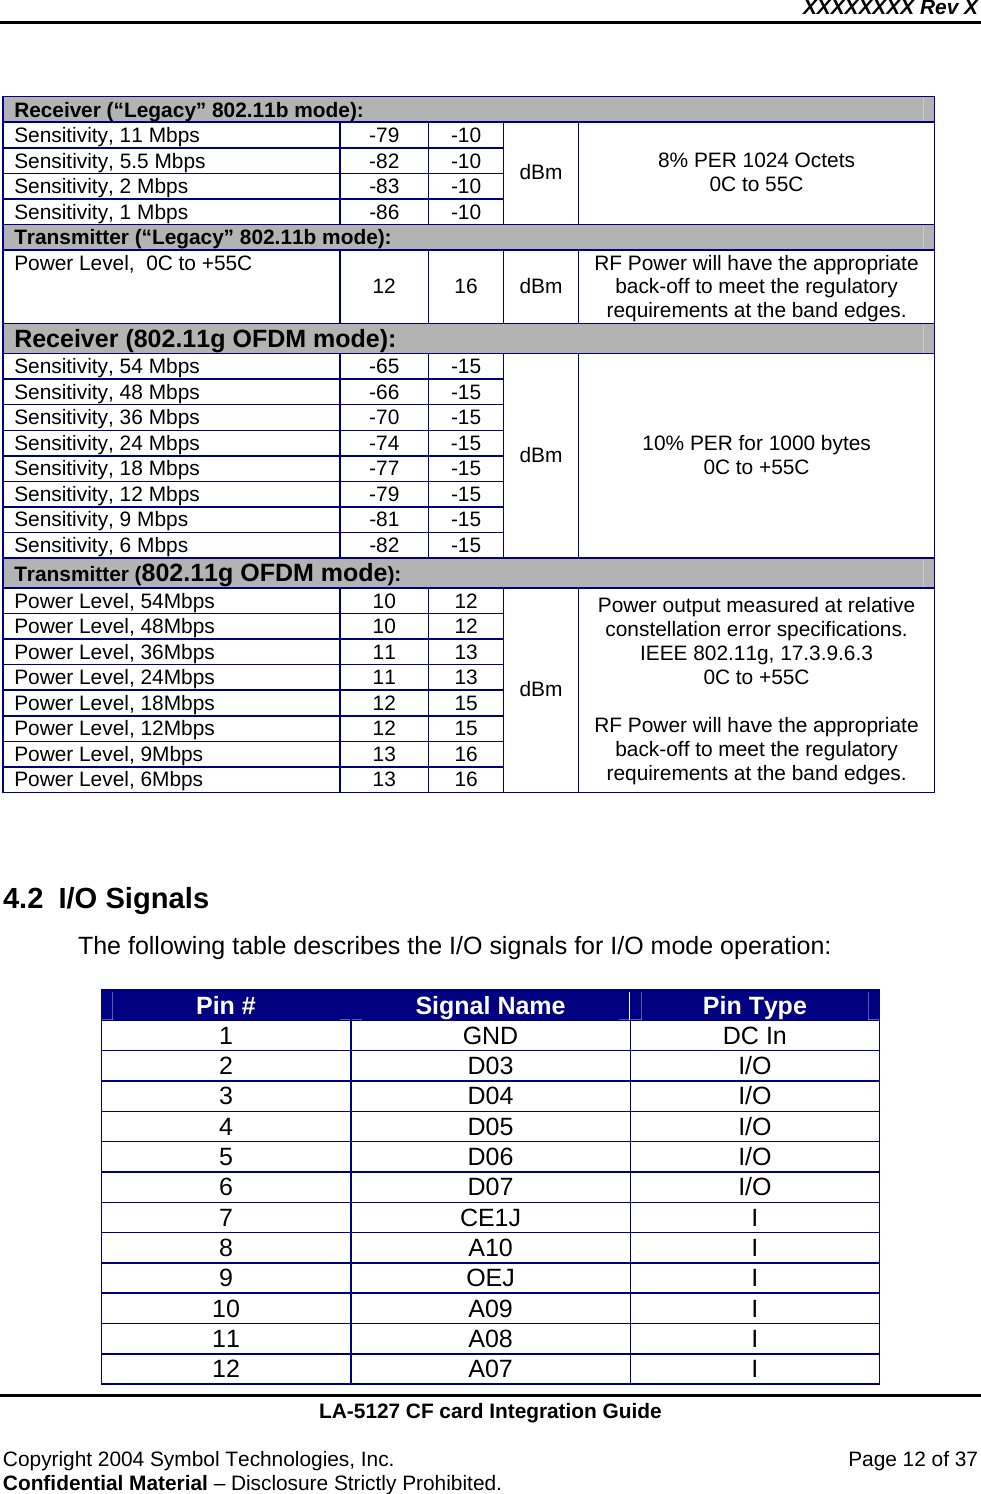 XXXXXXXX Rev X    LA-5127 CF card Integration Guide  Copyright 2004 Symbol Technologies, Inc.    Page 12 of 37 Confidential Material – Disclosure Strictly Prohibited. Receiver (“Legacy” 802.11b mode): Sensitivity, 11 Mbps  -79  -10 Sensitivity, 5.5 Mbps  -82  -10 Sensitivity, 2 Mbps  -83  -10 Sensitivity, 1 Mbps   -86  -10 dBm  8% PER 1024 Octets 0C to 55C Transmitter (“Legacy” 802.11b mode): Power Level,  0C to +55C   12 16 dBm RF Power will have the appropriate back-off to meet the regulatory requirements at the band edges. Receiver (802.11g OFDM mode): Sensitivity, 54 Mbps  -65  -15 Sensitivity, 48 Mbps  -66  -15 Sensitivity, 36 Mbps  -70  -15 Sensitivity, 24 Mbps   -74  -15 Sensitivity, 18 Mbps  -77  -15 Sensitivity, 12 Mbps  -79  -15 Sensitivity, 9 Mbps  -81  -15 Sensitivity, 6 Mbps   -82  -15 dBm  10% PER for 1000 bytes 0C to +55C Transmitter (802.11g OFDM mode): Power Level, 54Mbps  10  12 Power Level, 48Mbps  10  12 Power Level, 36Mbps  11  13 Power Level, 24Mbps  11  13 Power Level, 18Mbps  12  15 Power Level, 12Mbps  12  15 Power Level, 9Mbps  13  16 Power Level, 6Mbps  13  16 dBm Power output measured at relative constellation error specifications. IEEE 802.11g, 17.3.9.6.3 0C to +55C  RF Power will have the appropriate back-off to meet the regulatory requirements at the band edges.    4.2  I/O Signals  The following table describes the I/O signals for I/O mode operation:  Pin #  Signal Name  Pin Type 1 GND DC In 2 D03 I/O 3 D04 I/O 4 D05 I/O 5 D06 I/O 6 D07 I/O 7 CE1J I 8 A10 I 9 OEJ I 10 A09  I 11 A08  I 12 A07  I 